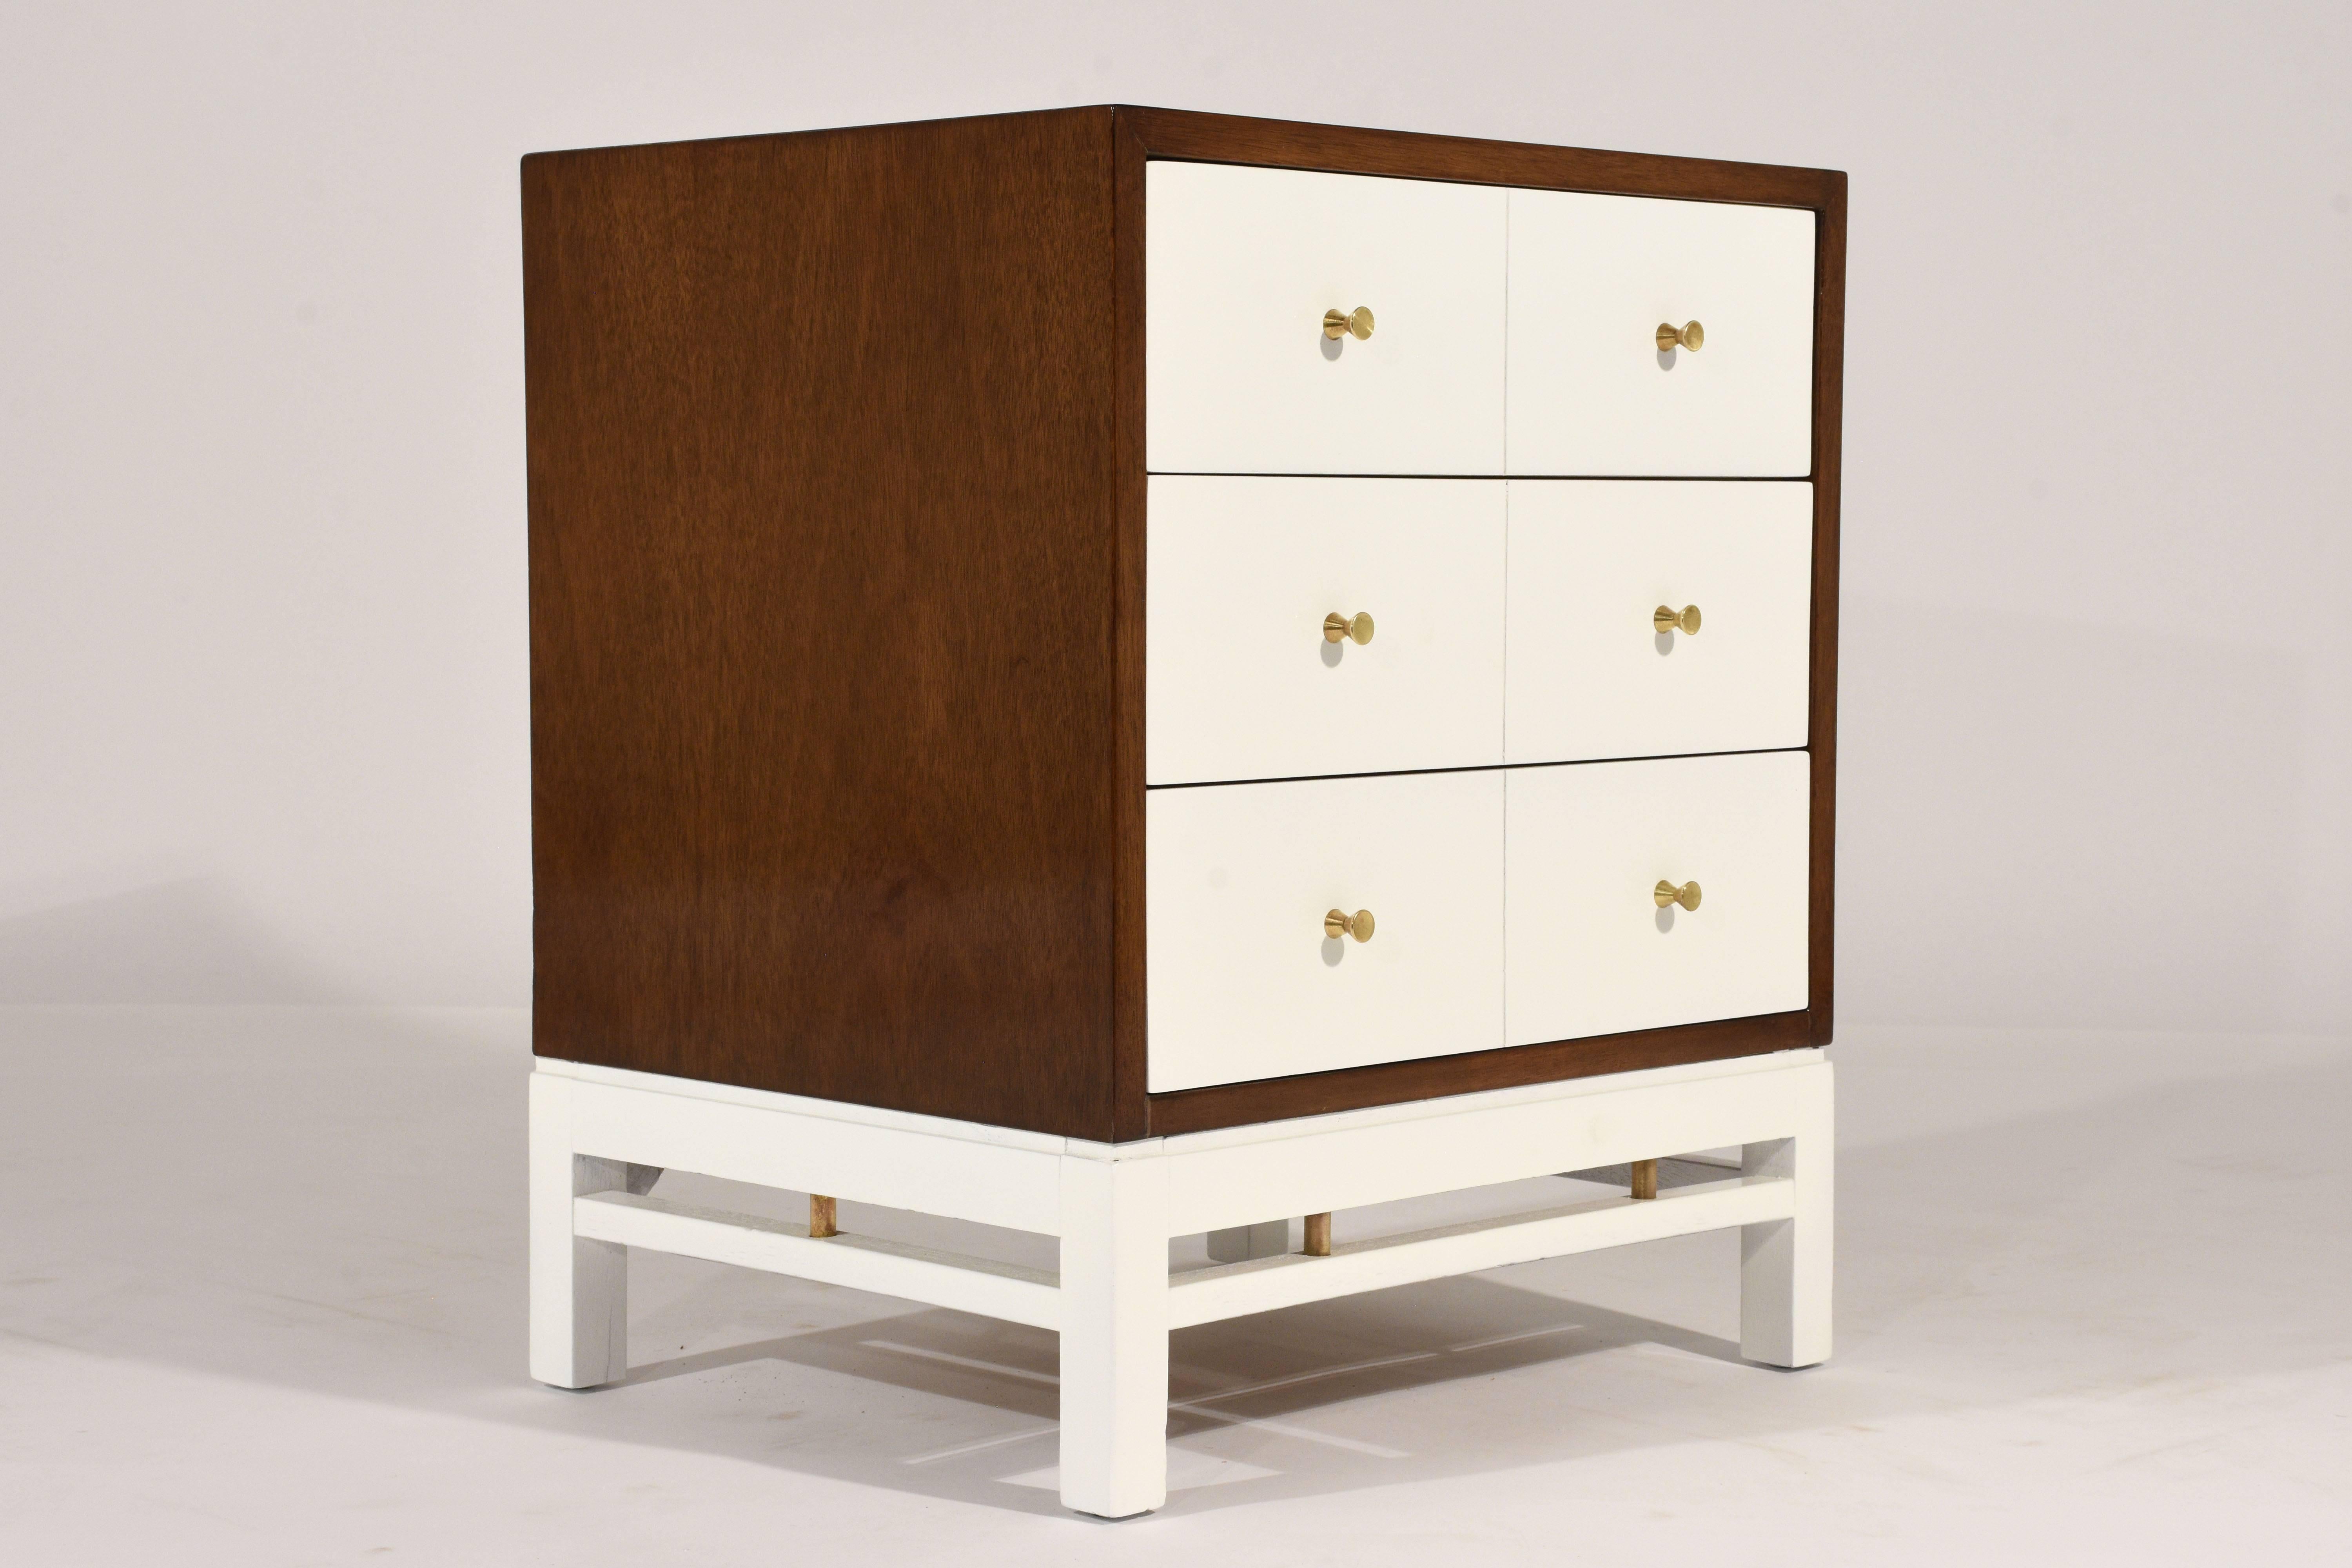 Carved Pair of Mid-Century Modern-Style Nightstands by Paul McCobb